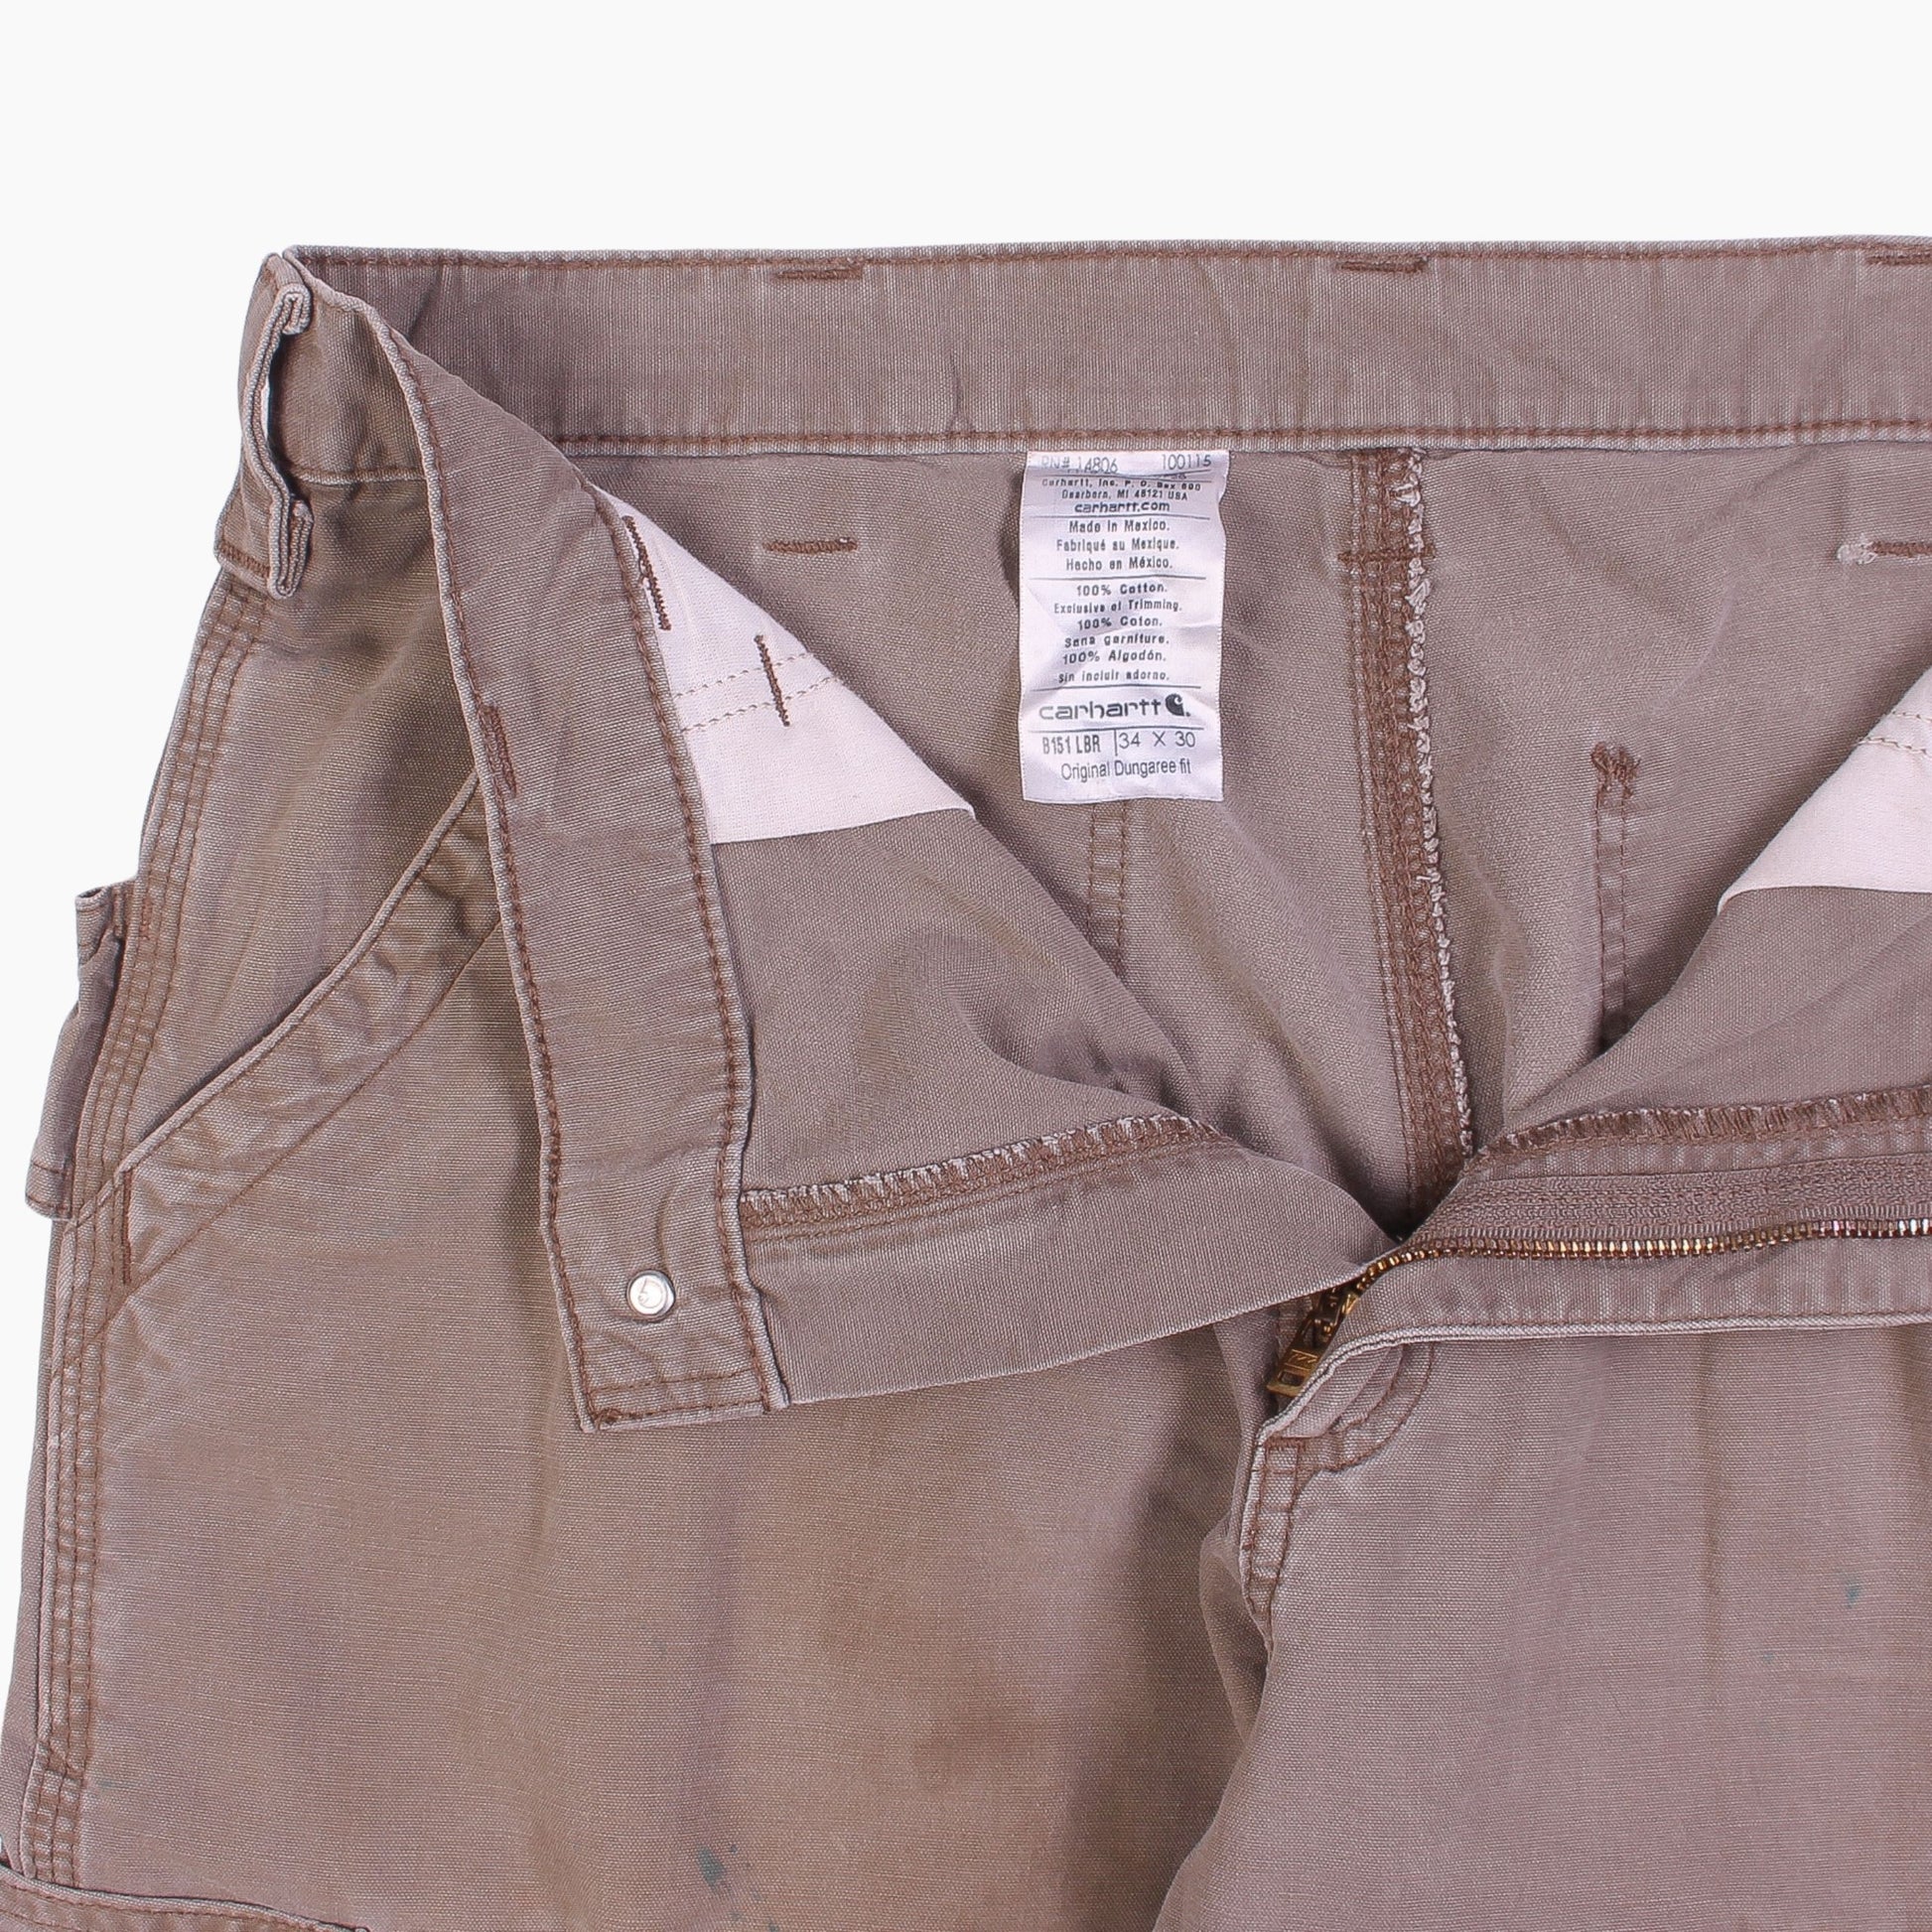 Vintage Carhartt Carpenter Pants - Washed Brown - 34/30 - American Madness